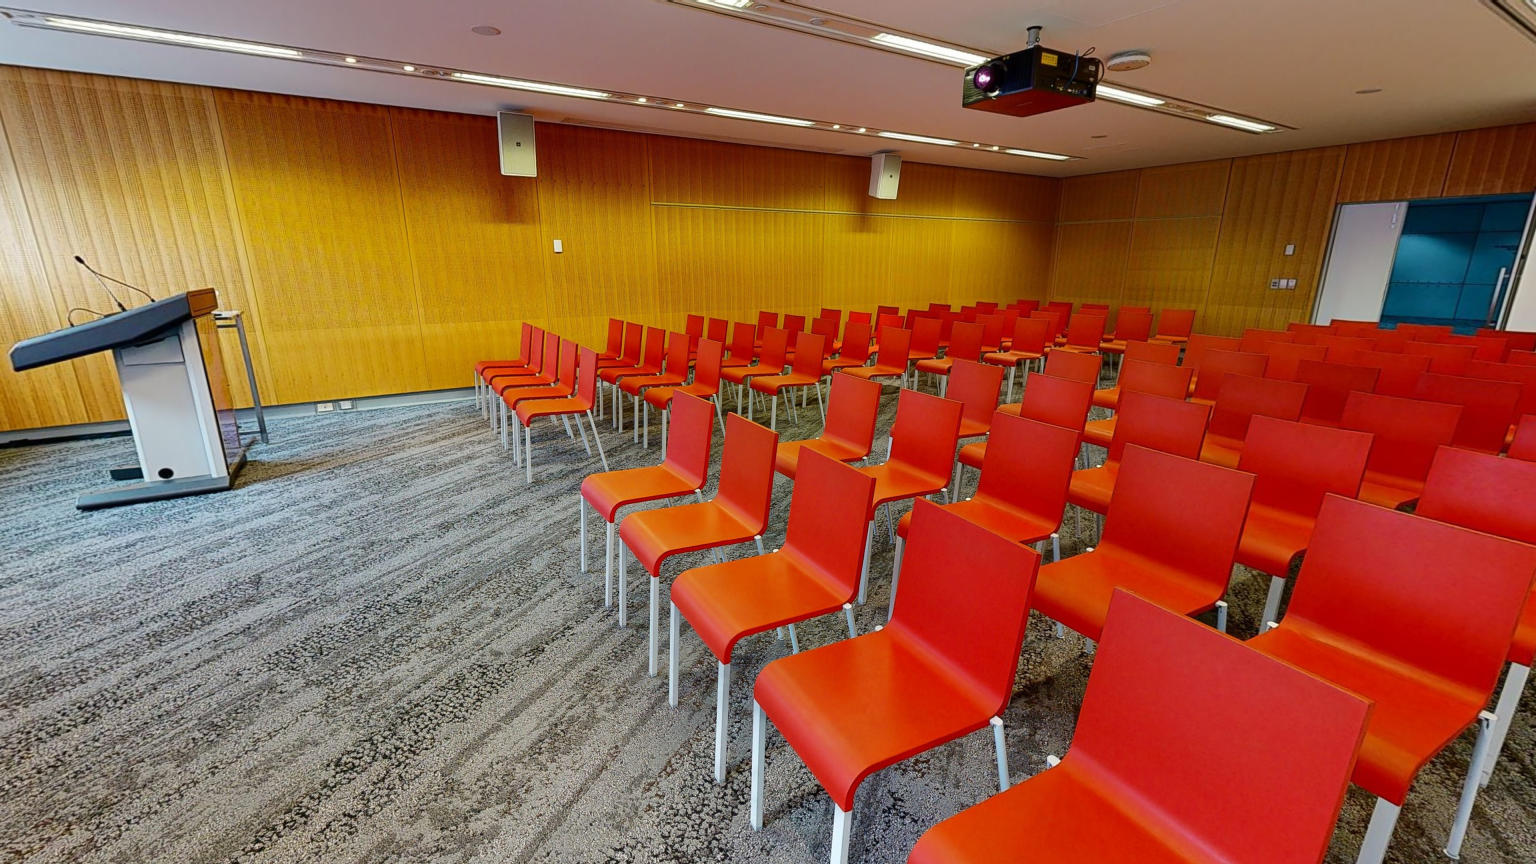 Conference or meeting room with orange chairs set up in rows facing a lectern.